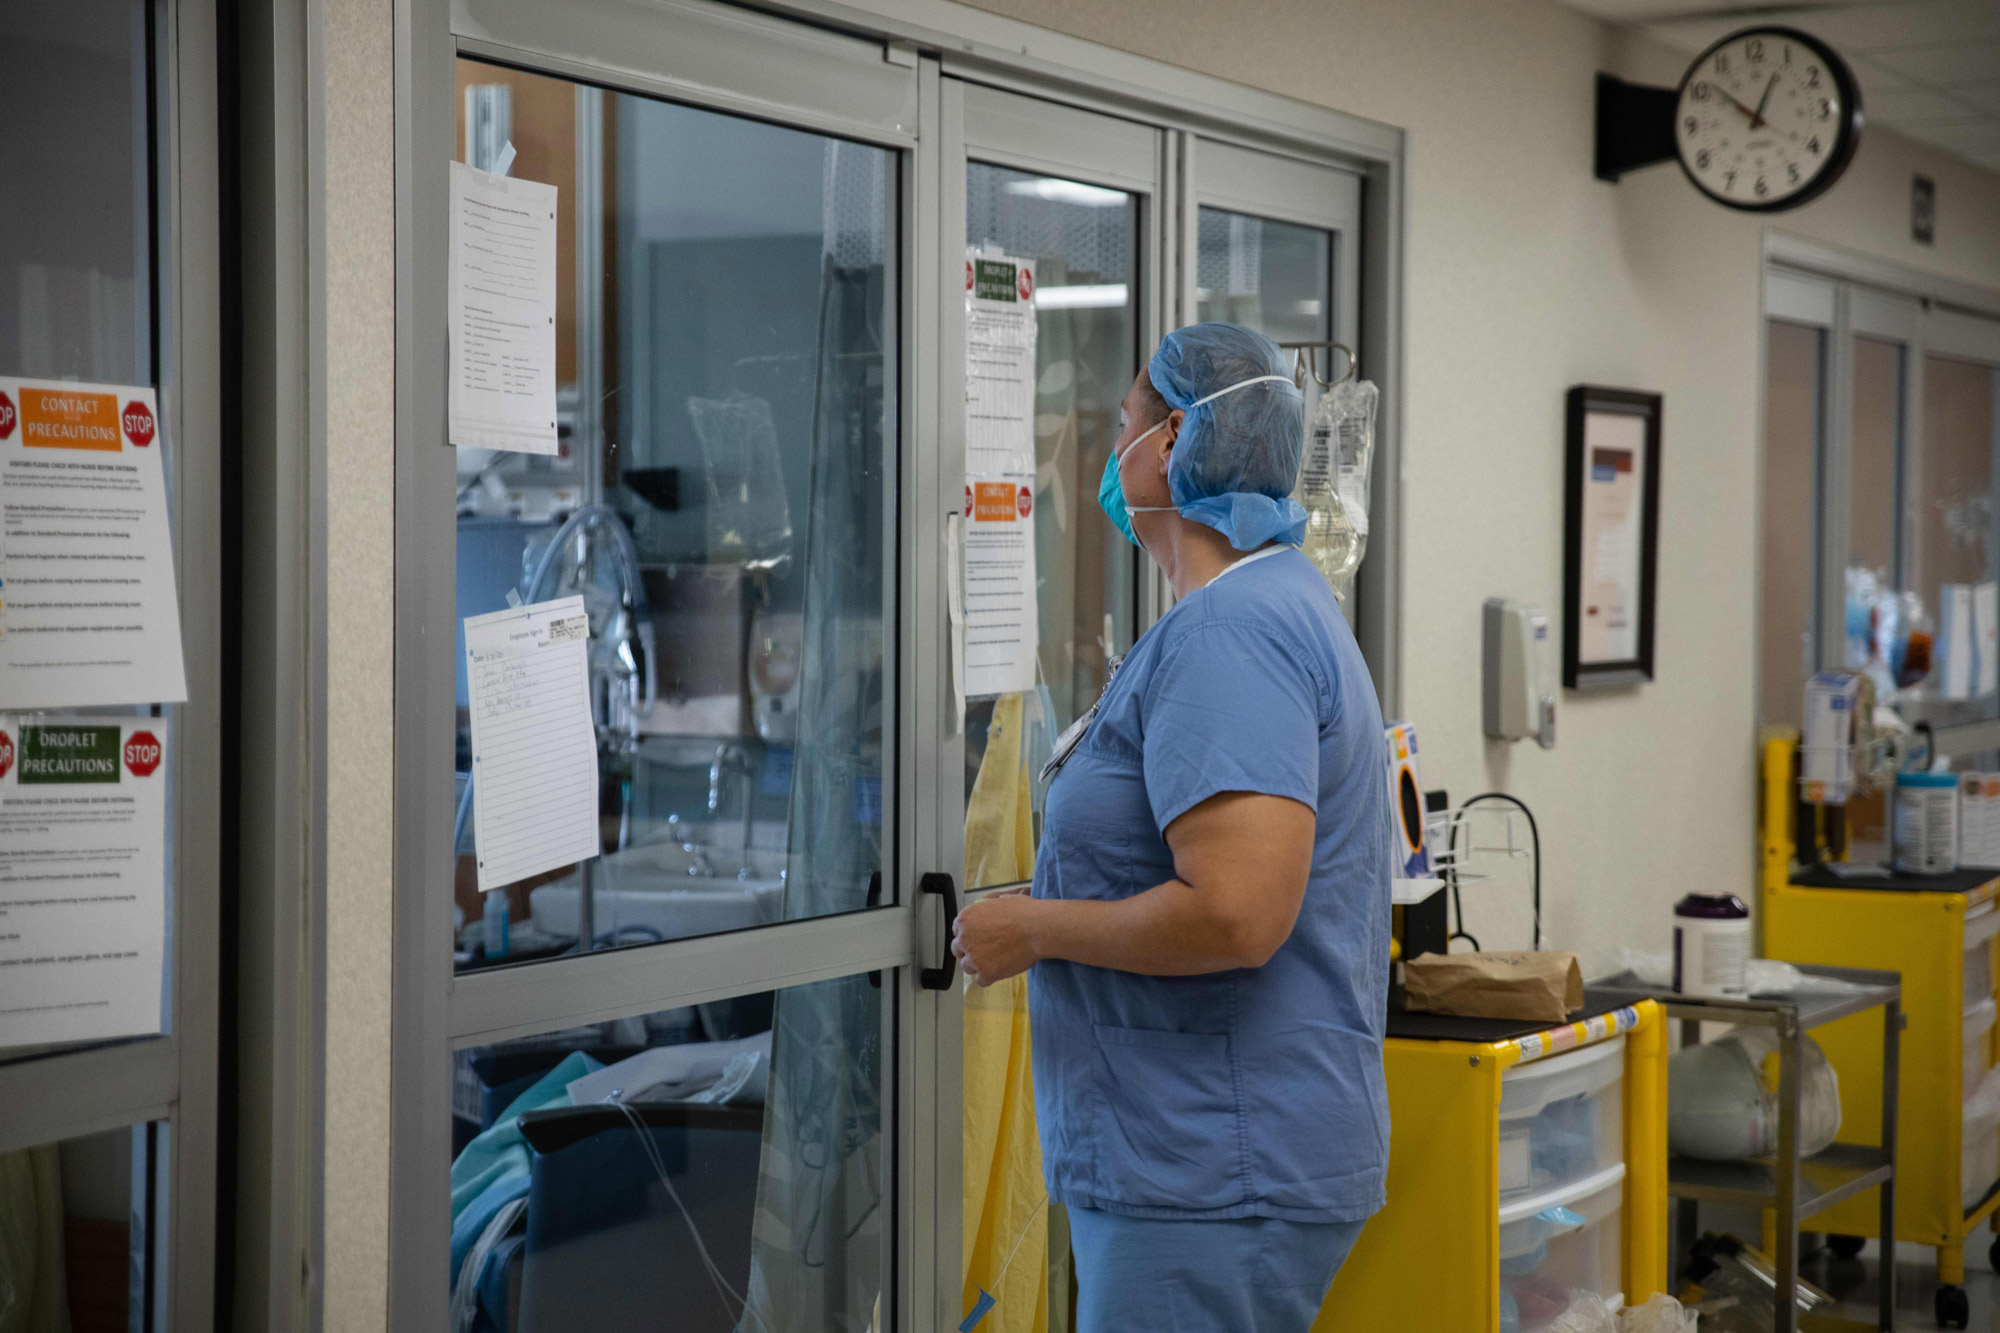 A healthcare professional prepares to enter a Covid-19 patient's room in the ICU at Van Wert County Hospital in Van Wert, Ohio on November 20.